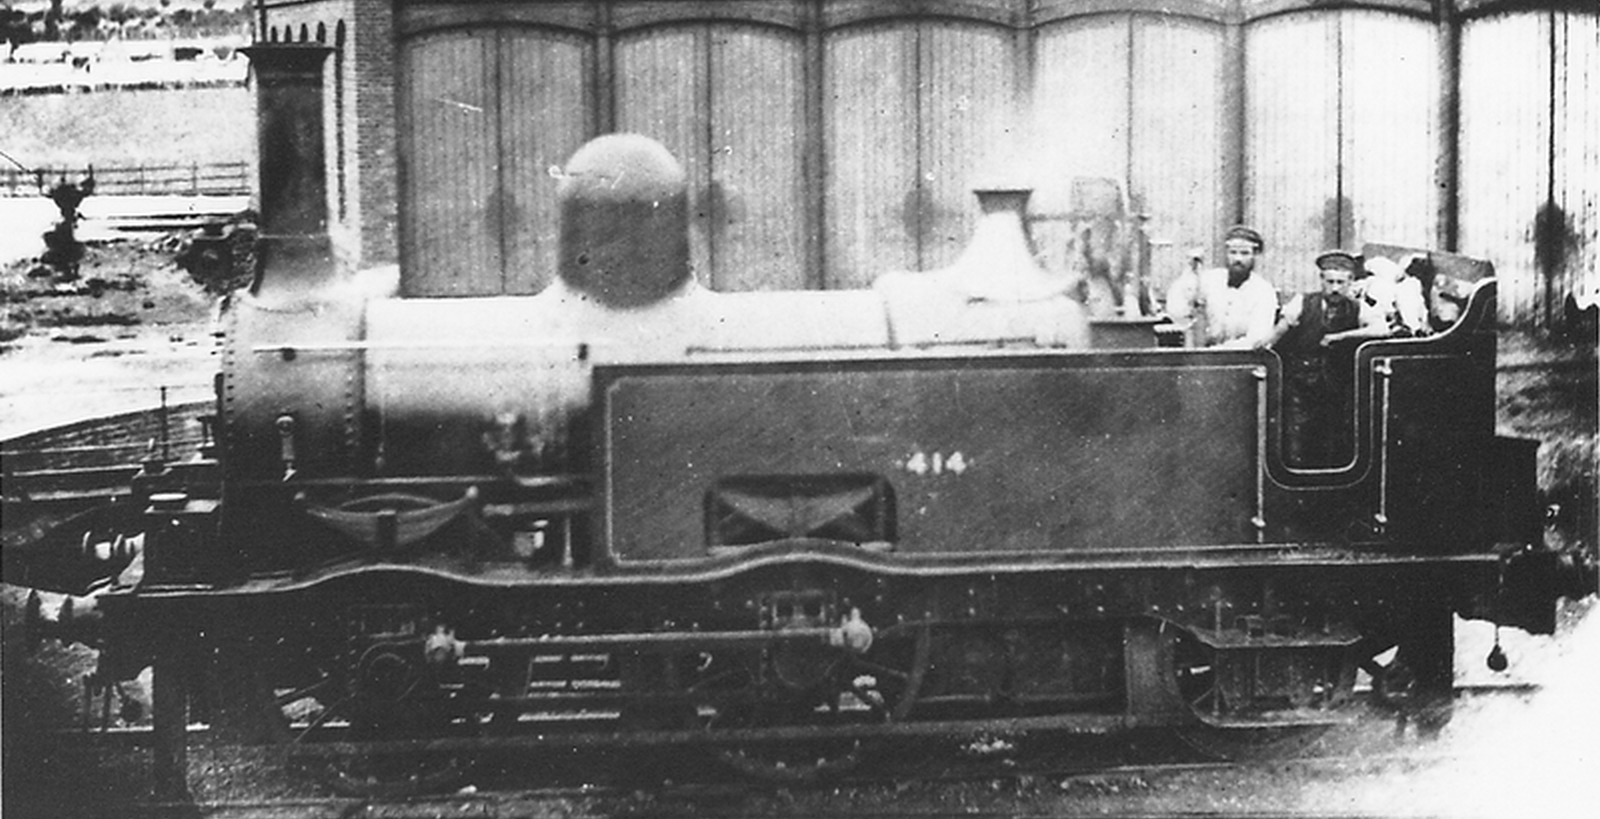 No. 213 after being renumbered to 414 in March 1880